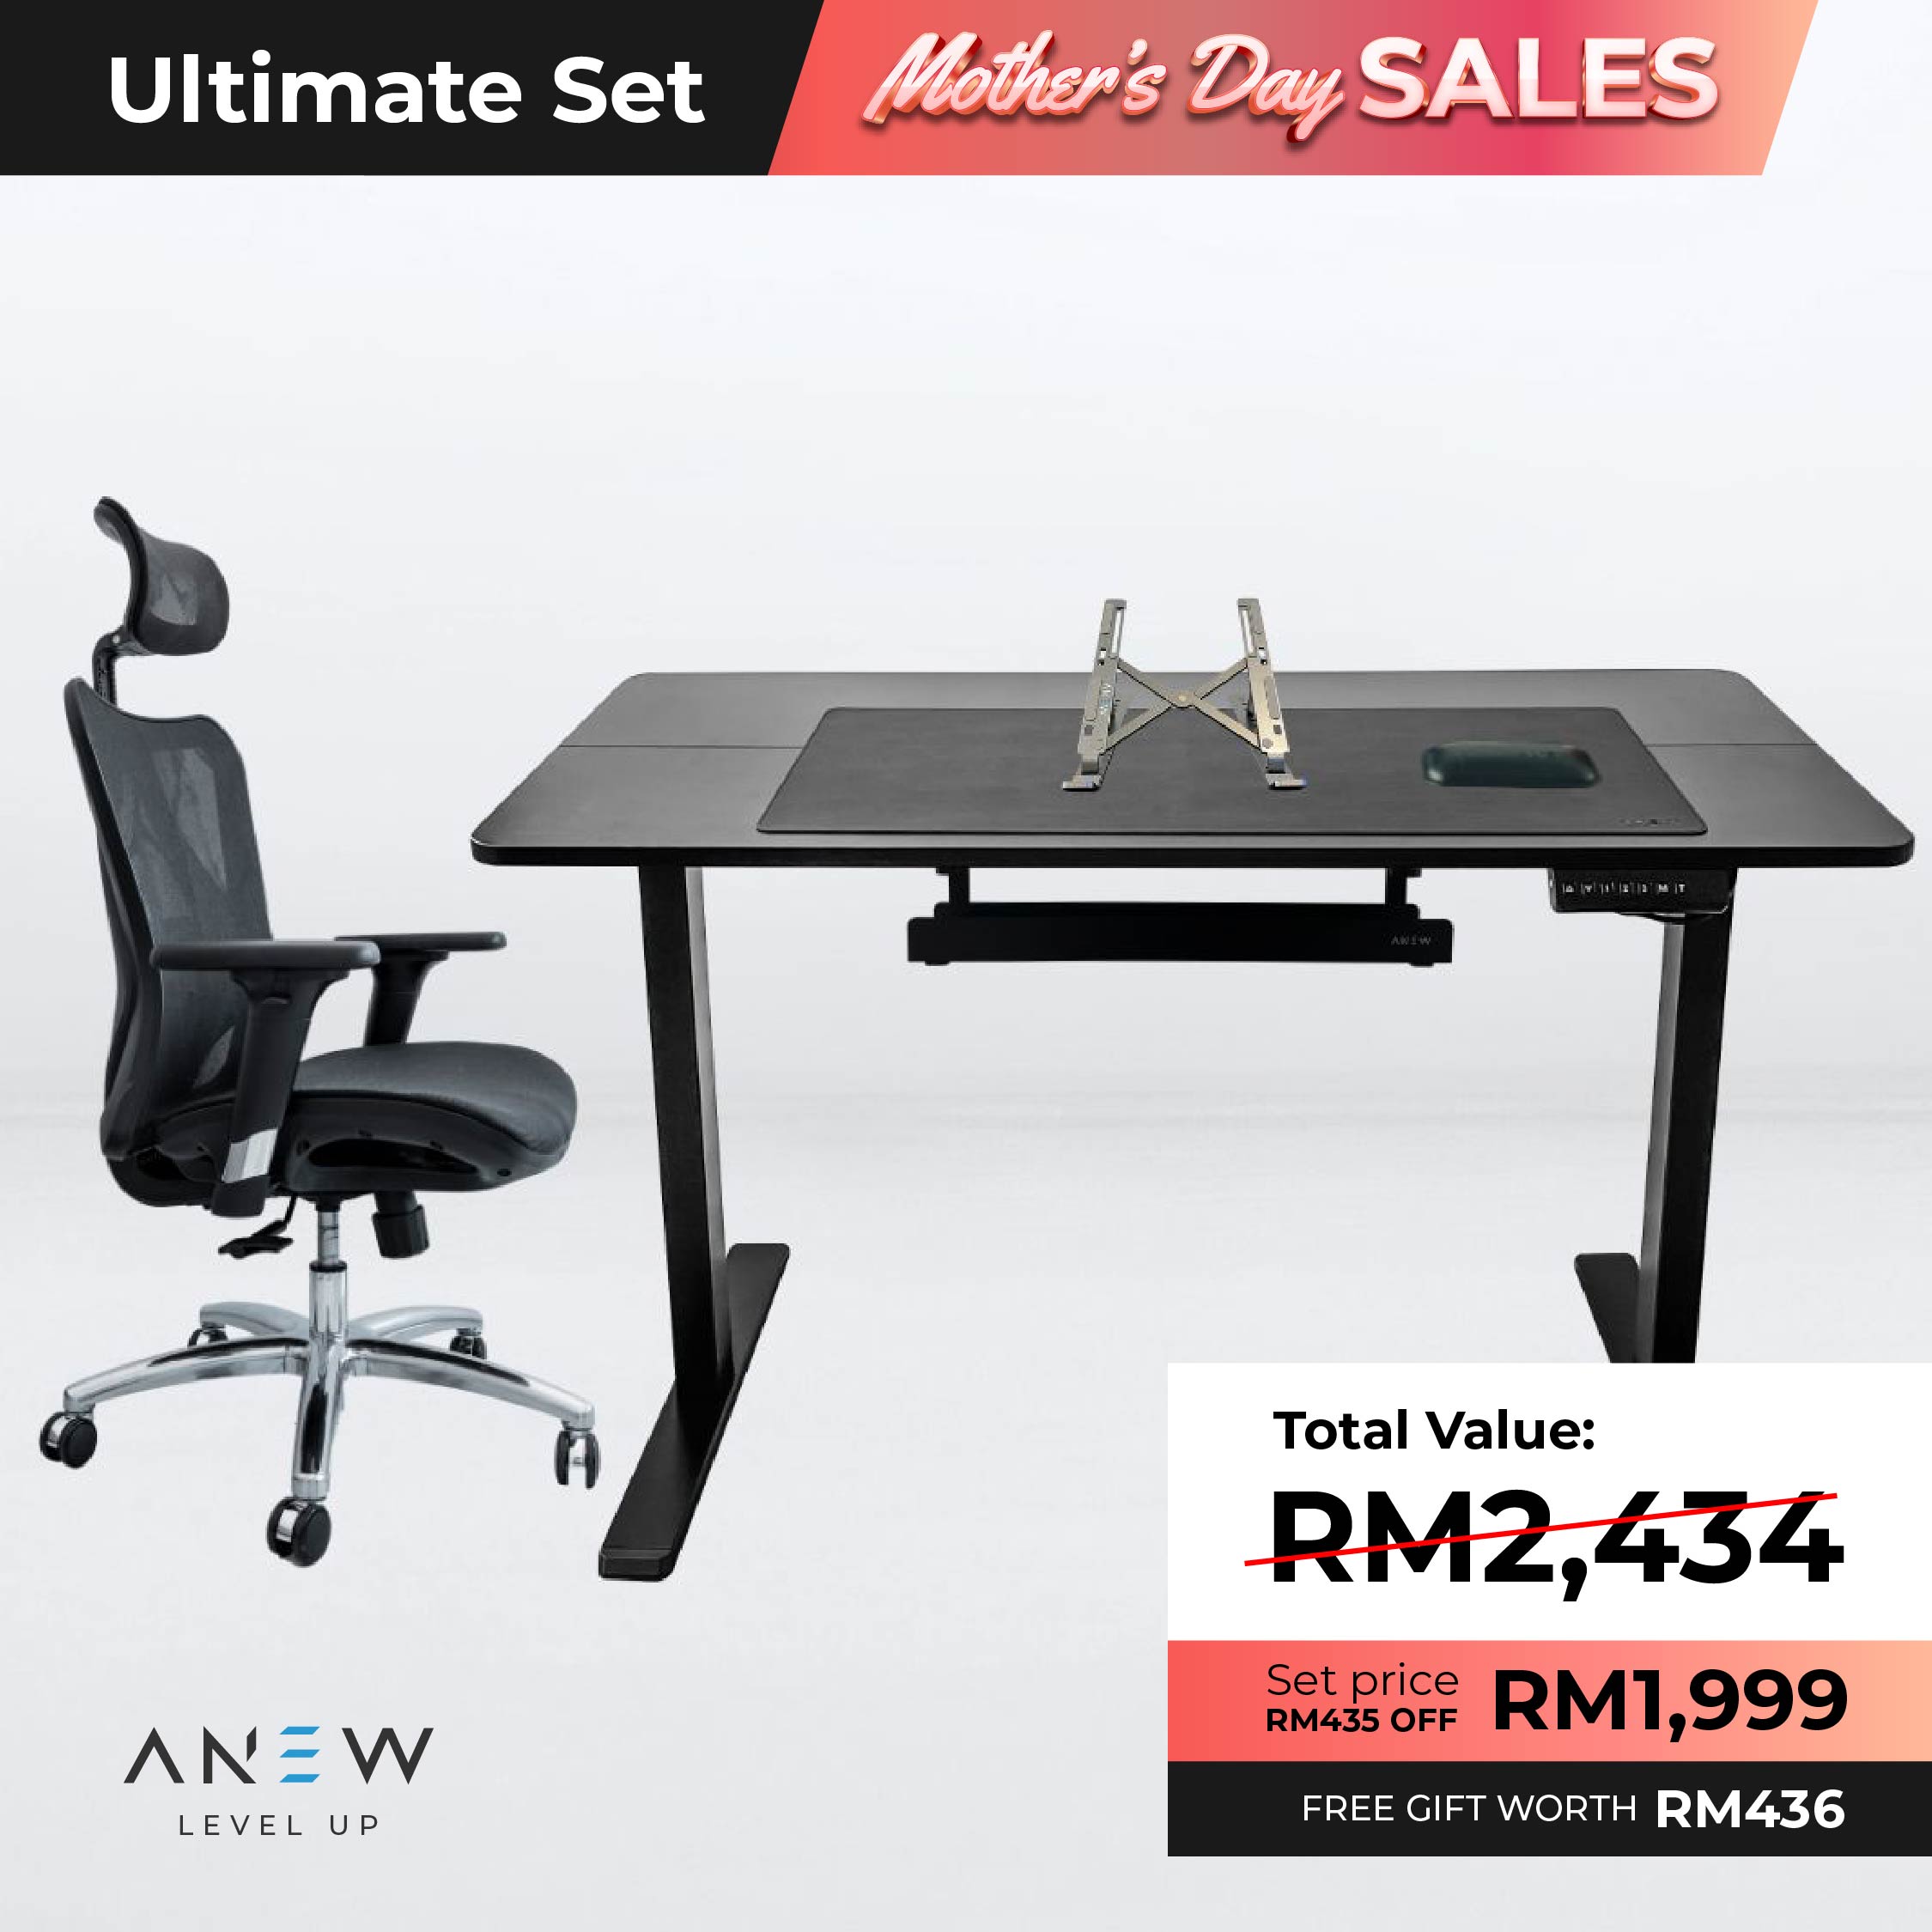 ANEW Standard Smart Desk - Ultimate Set  c/w Free Gift worth RM436